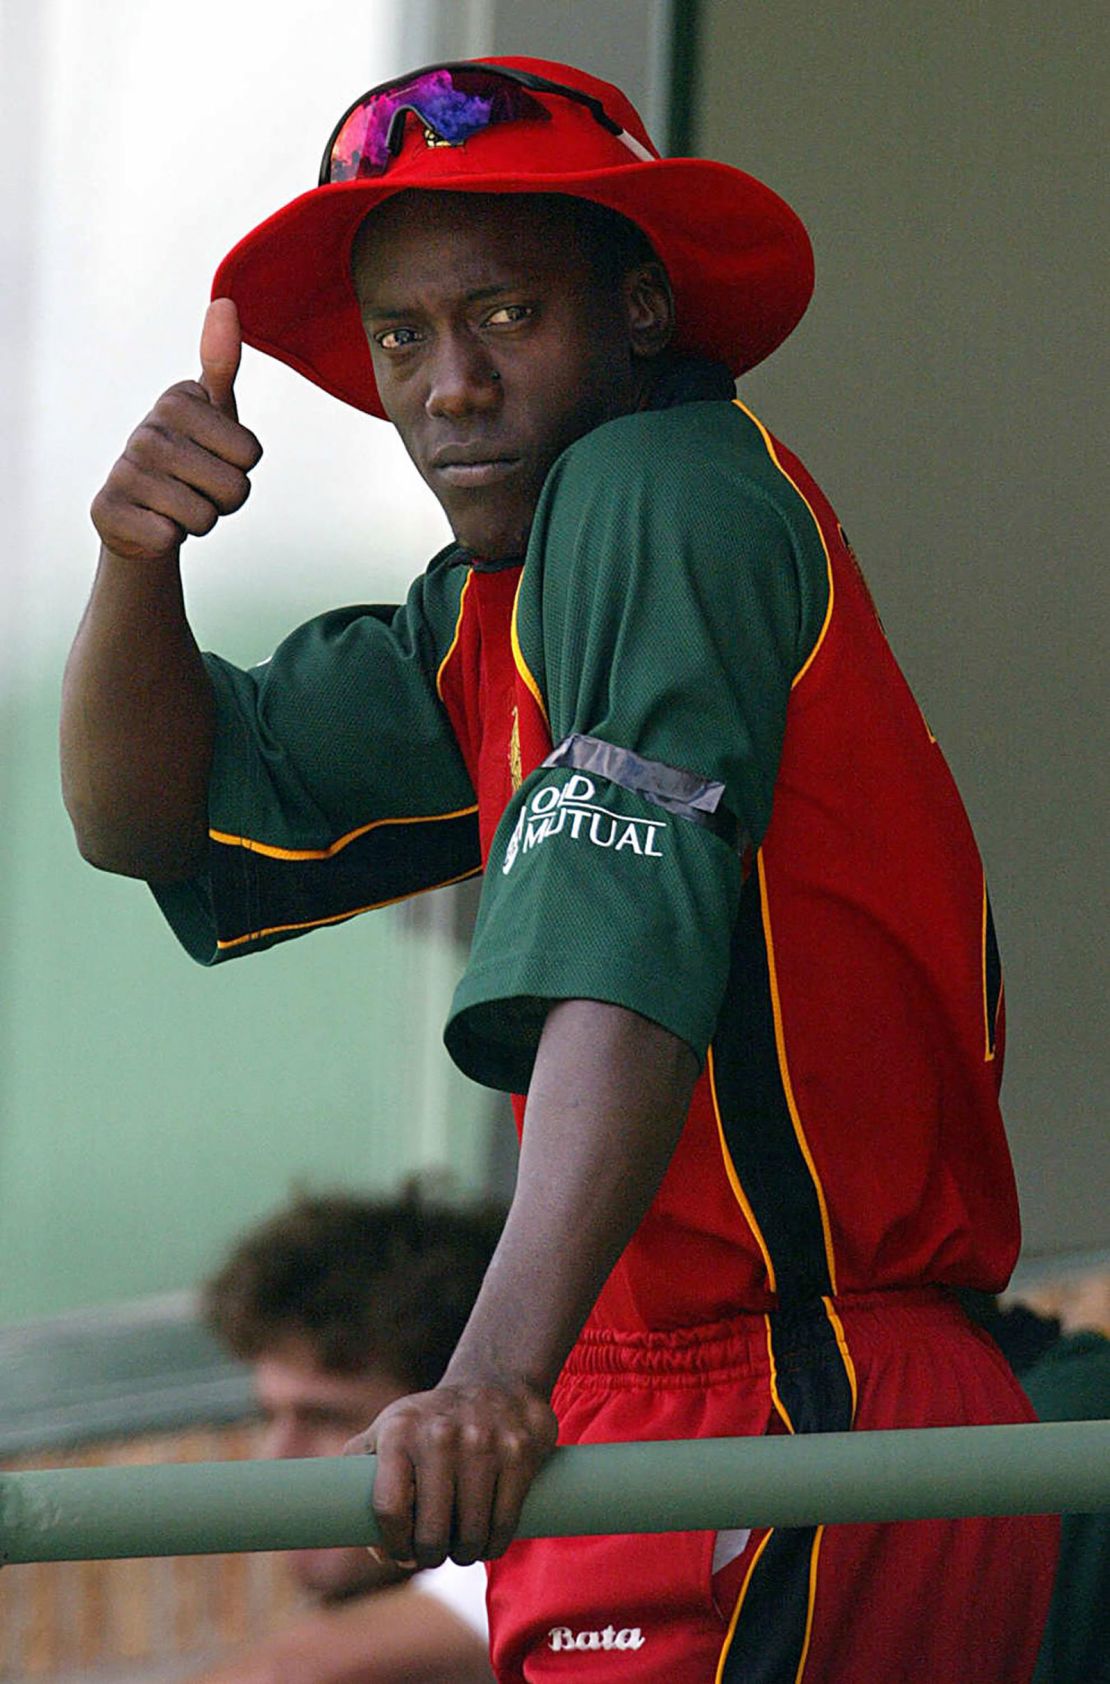 Olonga wears a black armband during the 2003 Cricket World Cup.